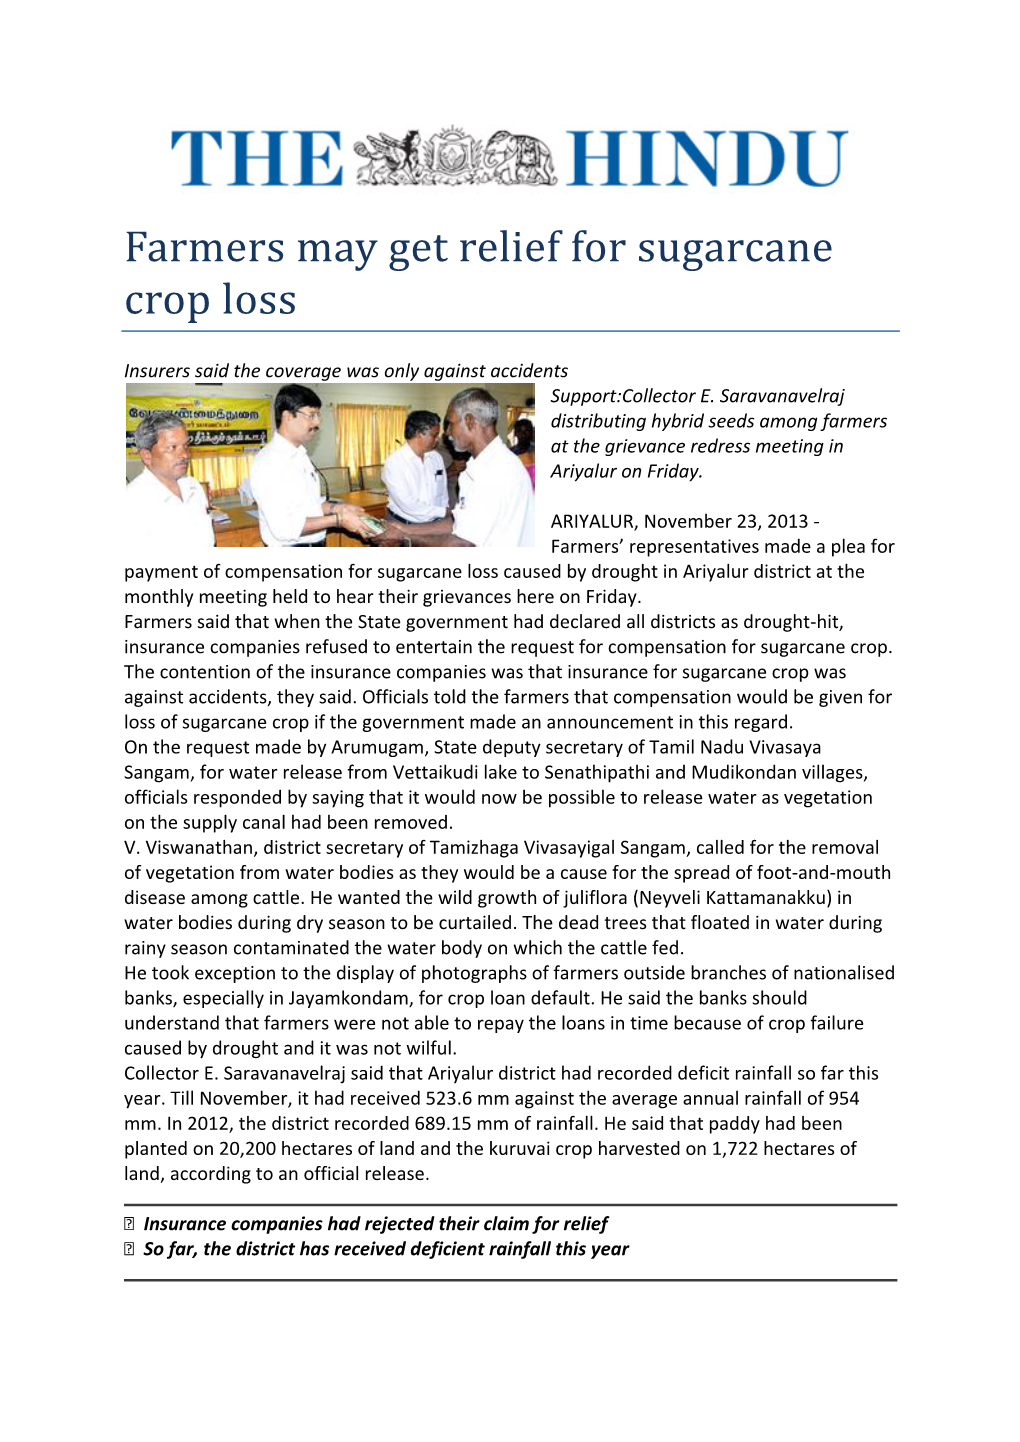 Farmers May Get Relief for Sugarcane Crop Loss